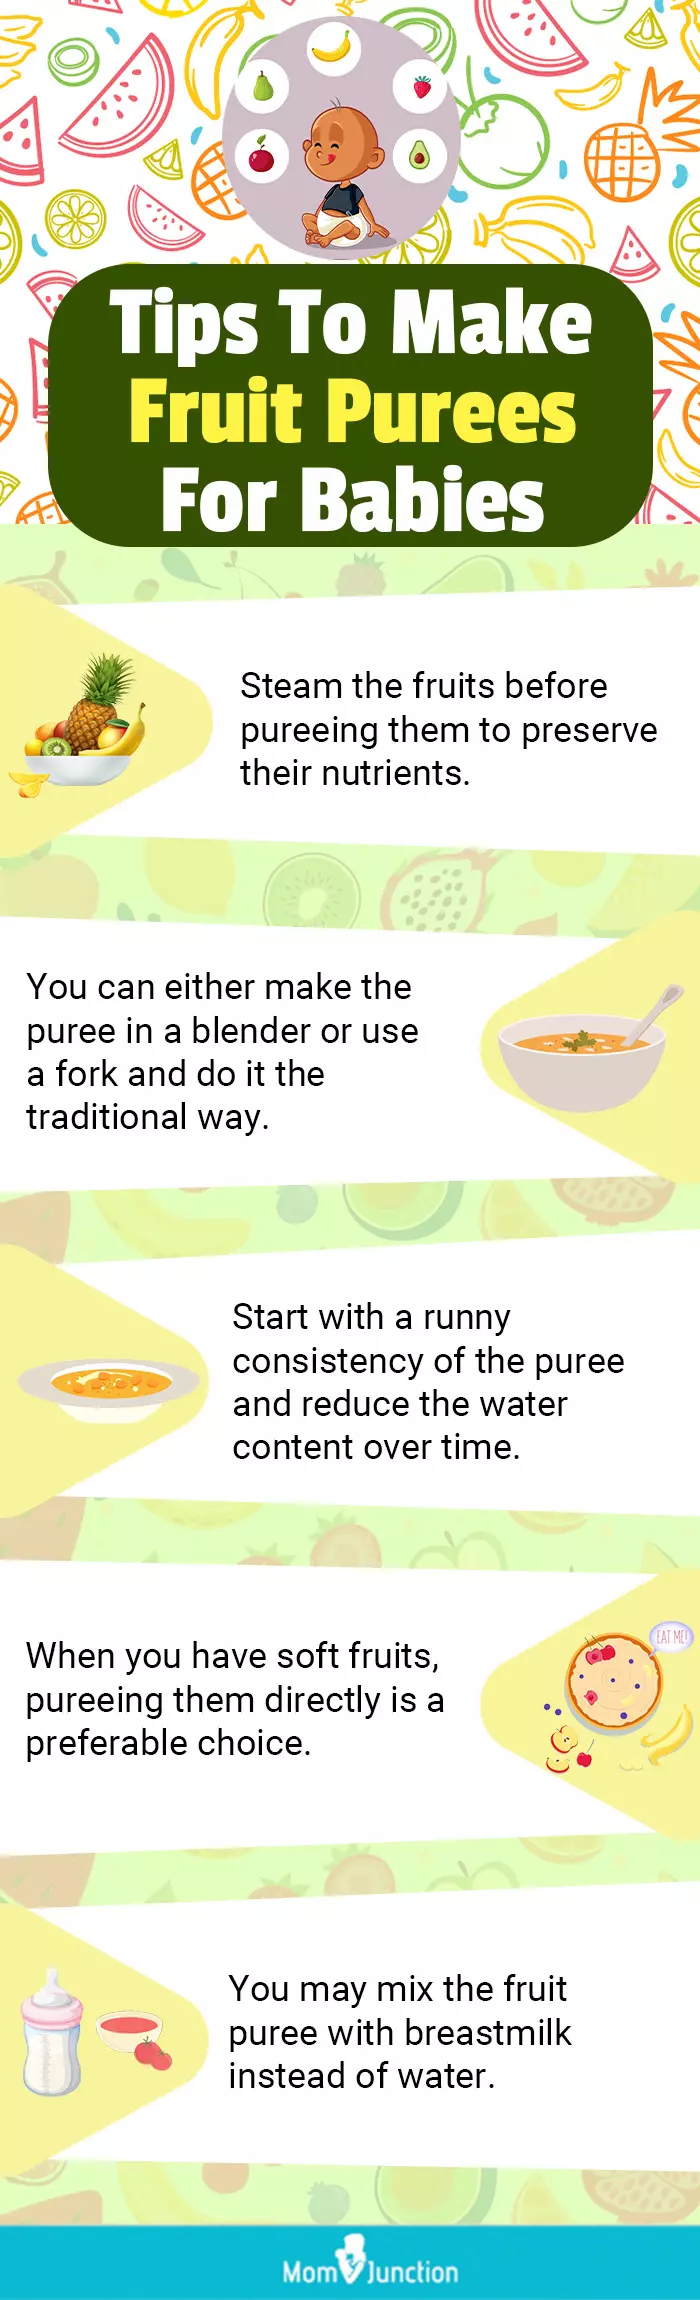 tips to make fruit purees for babies (infographic)